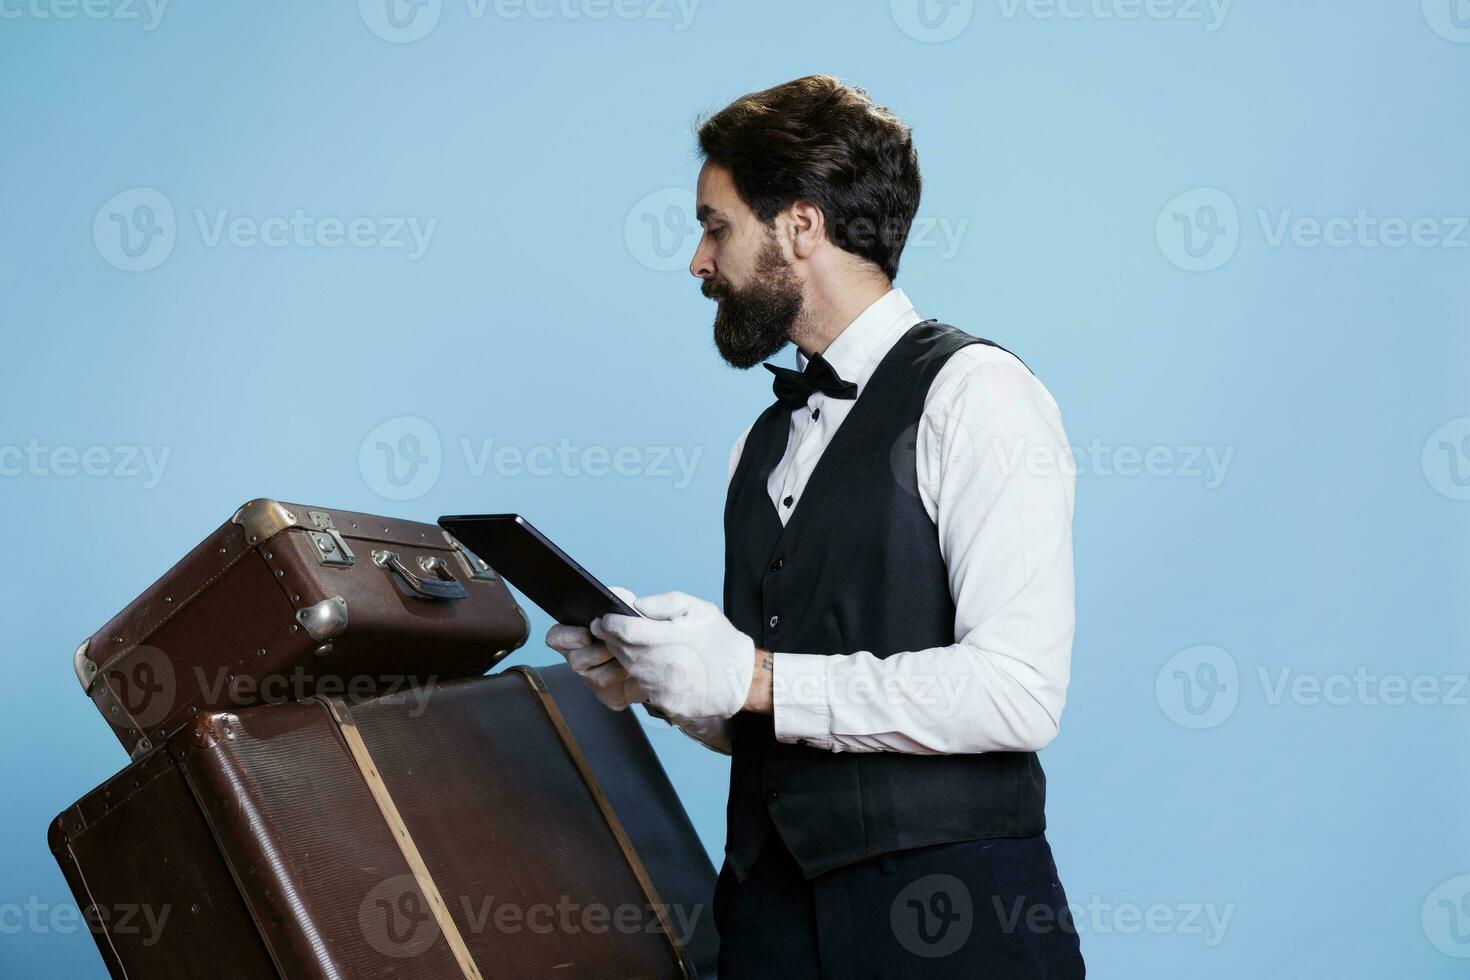 Hotel concierge counting trolley bags and checking tablet with list of reservations, studio shot with blue background. Young professional doorman with gloves taking care of luggage. photo